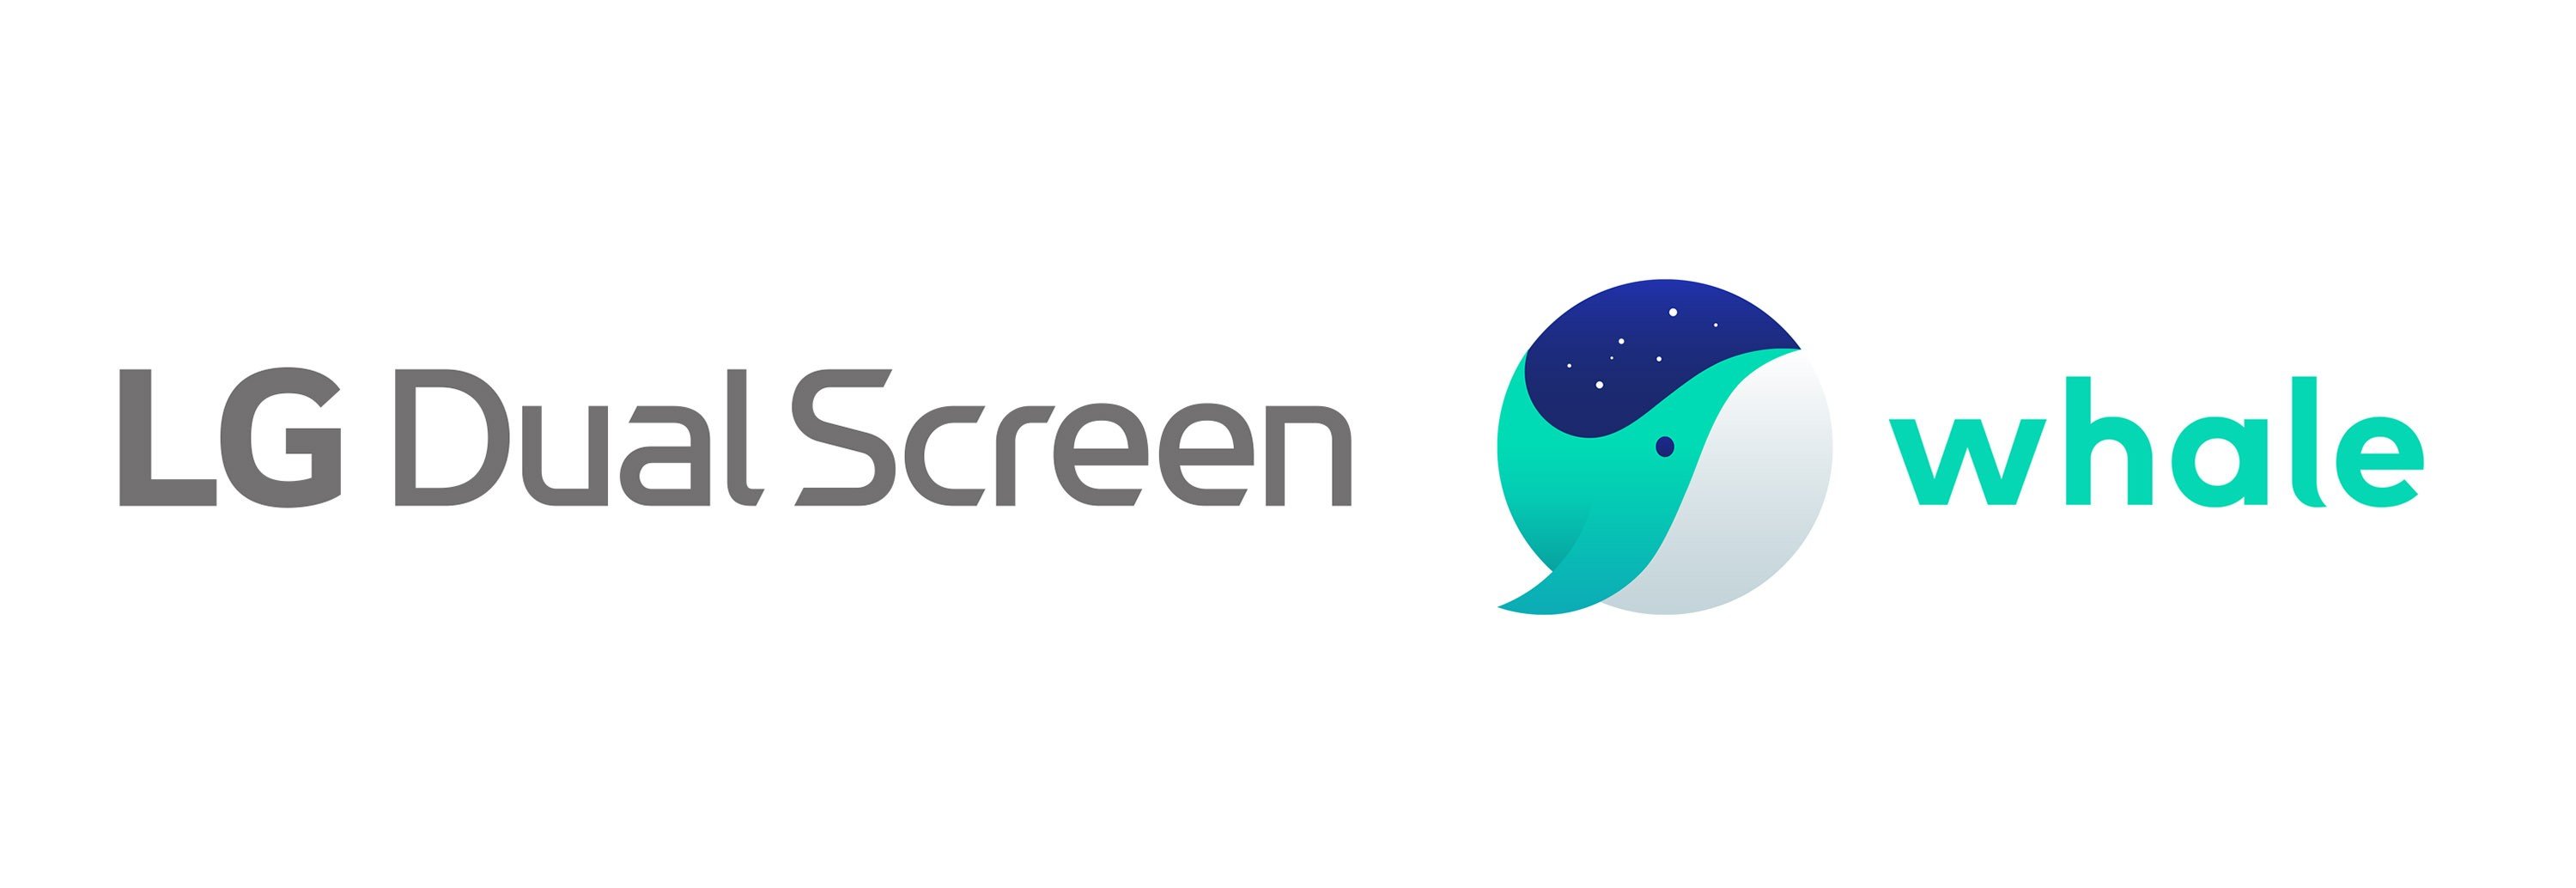 Whale Browser for LG Dual Screen